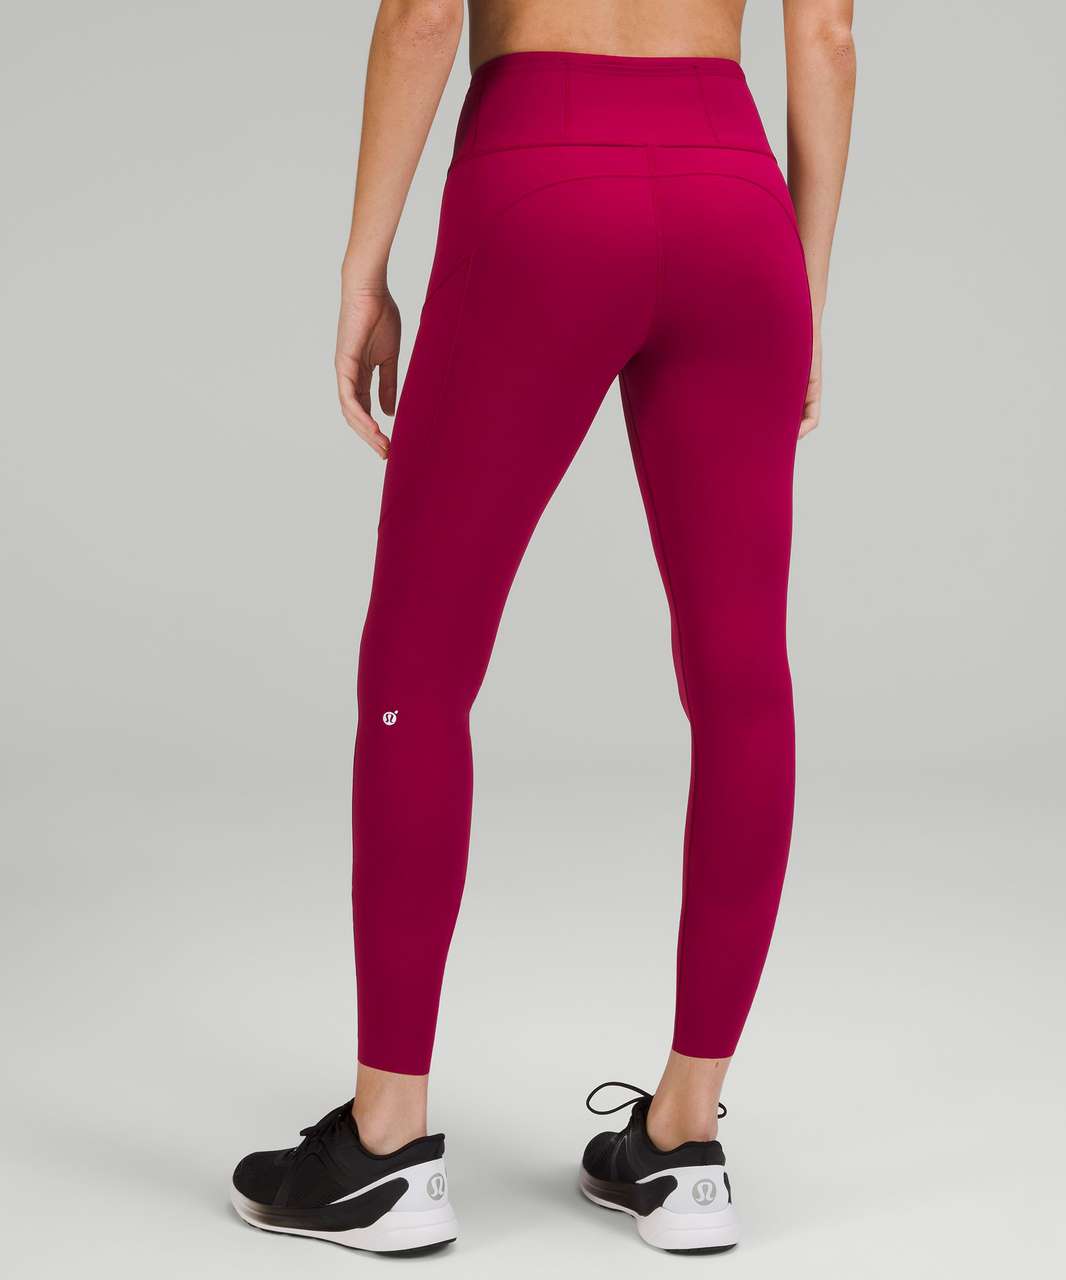 NWT Lululemon Fast Free High-Rise Legging Crop 19 Sz 6 Cassis Red Maroon  Nulux